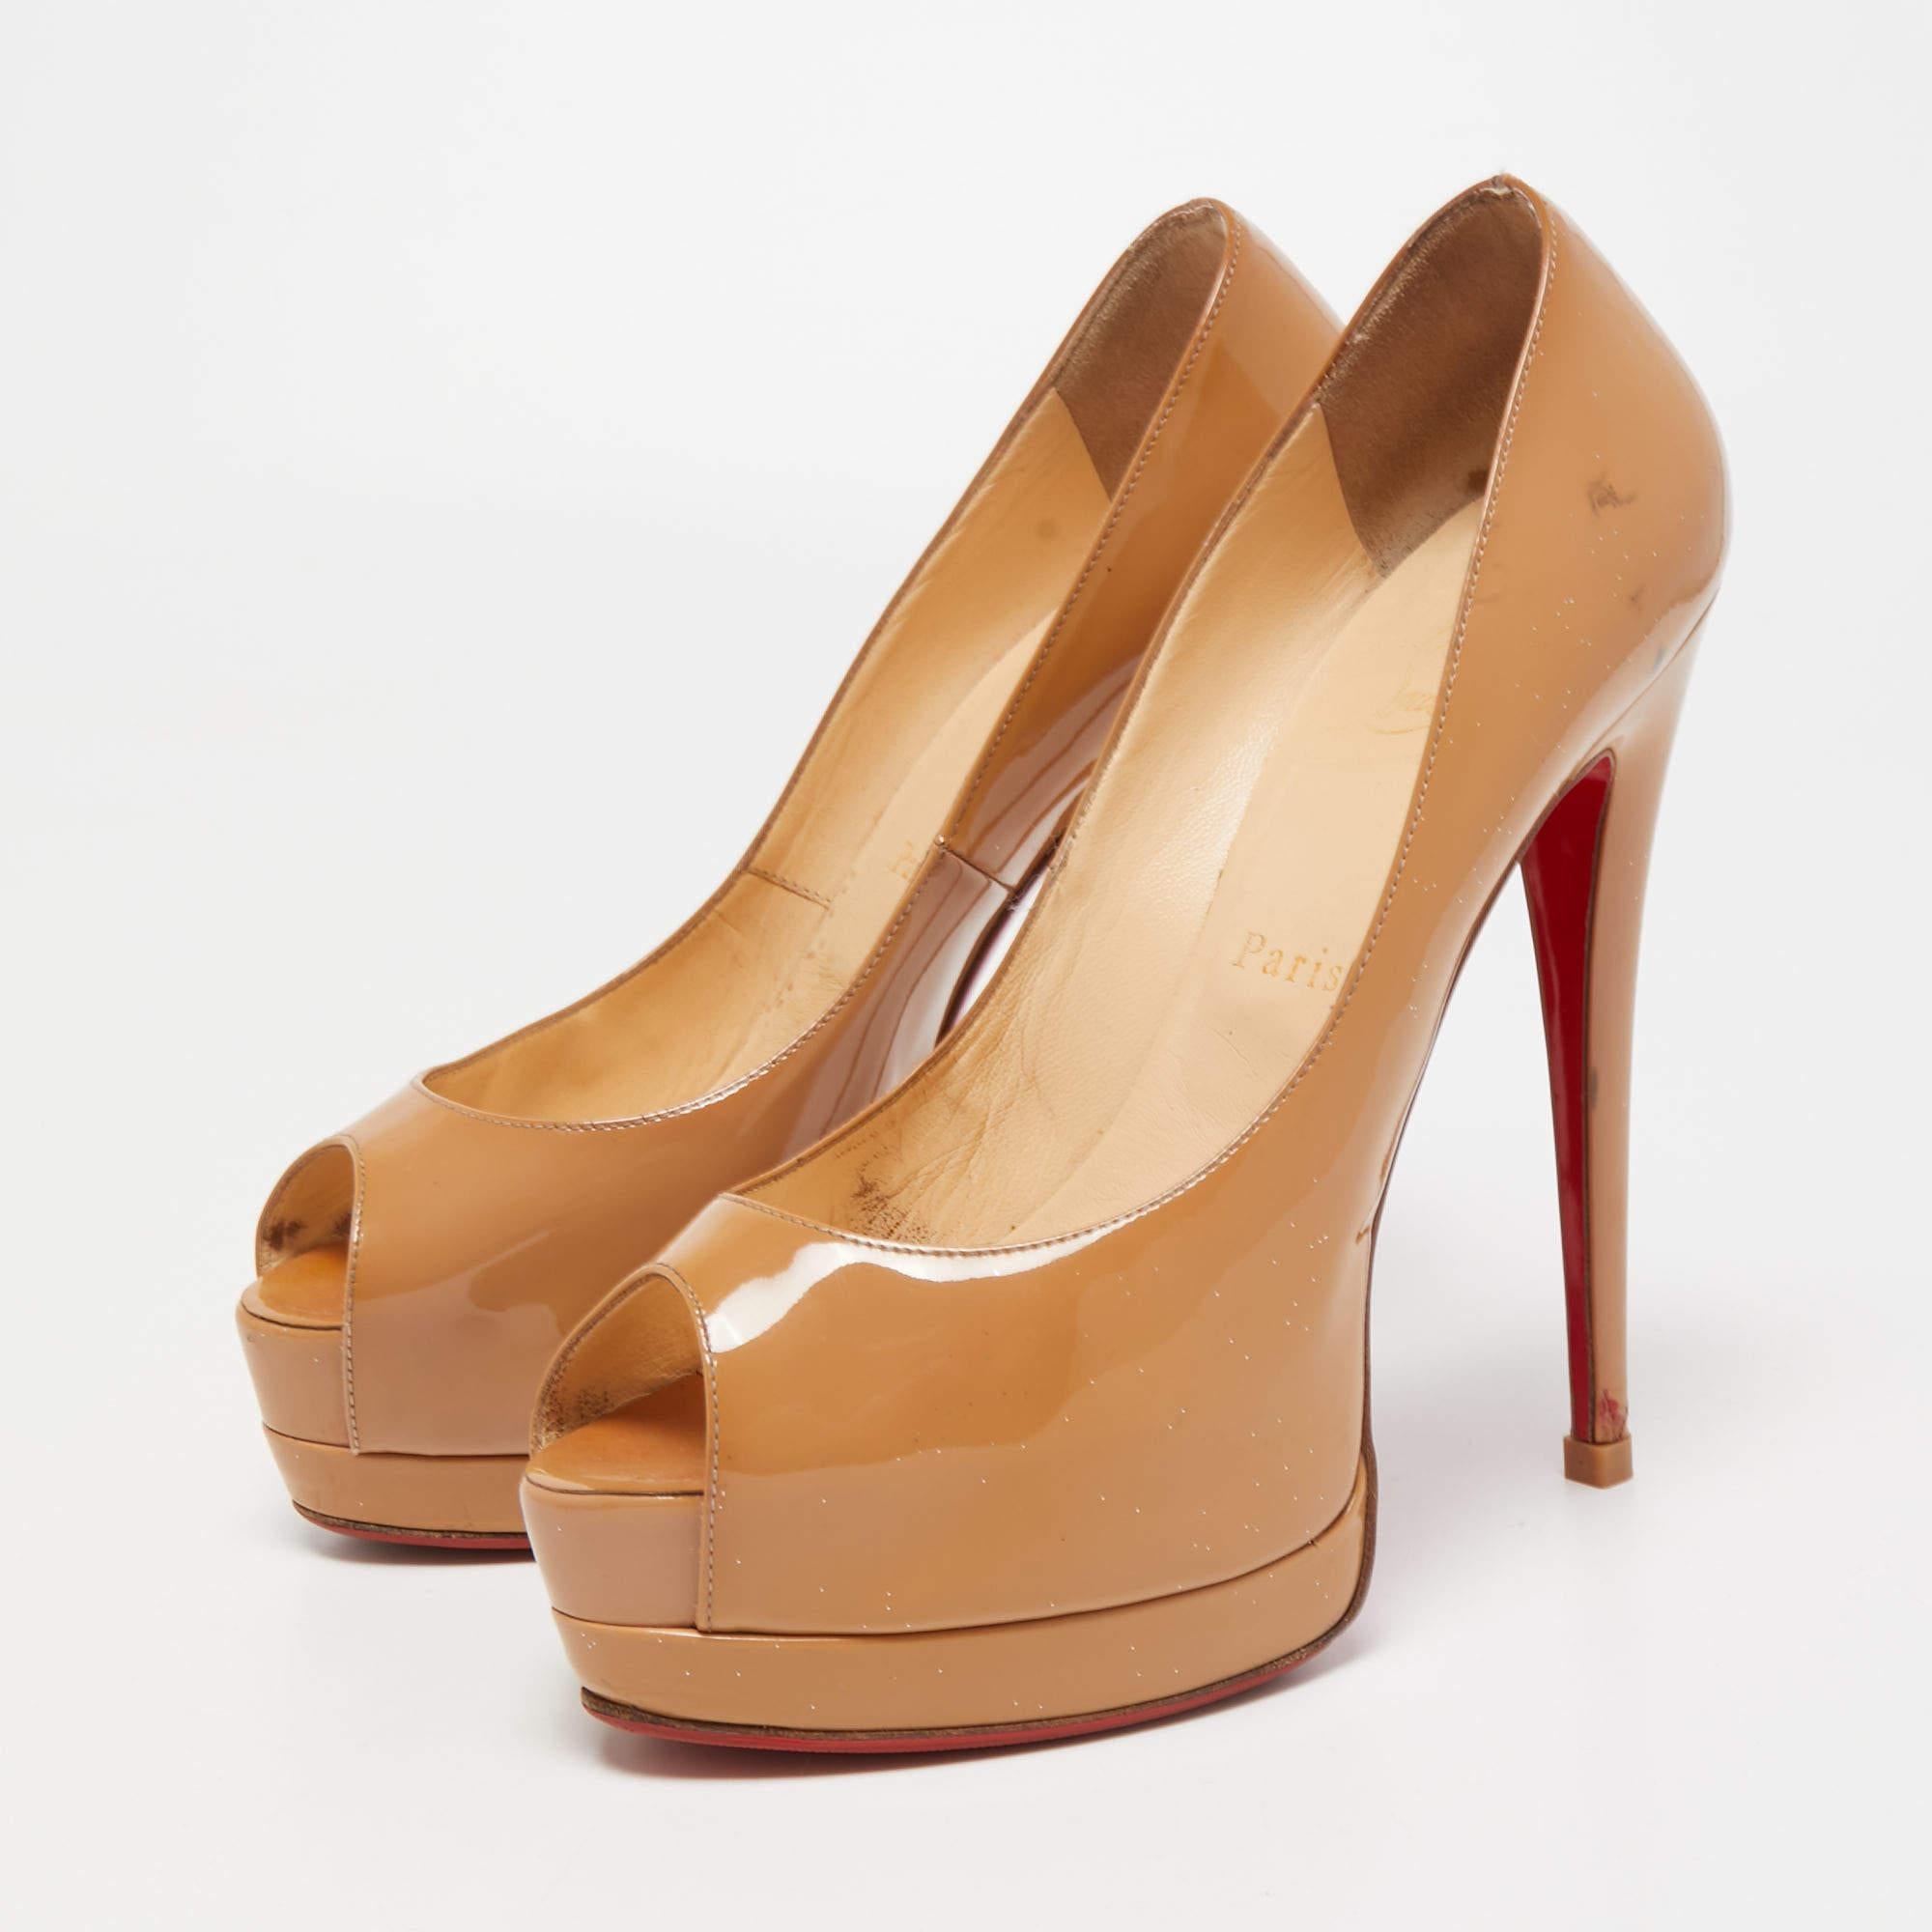 These Christian Louboutin pumps are a great choice if you’re looking to add a pair that's both classy and versatile. The pair has been made in Italy from beige patent leather and set on platforms, and 14.5 cm heels.

